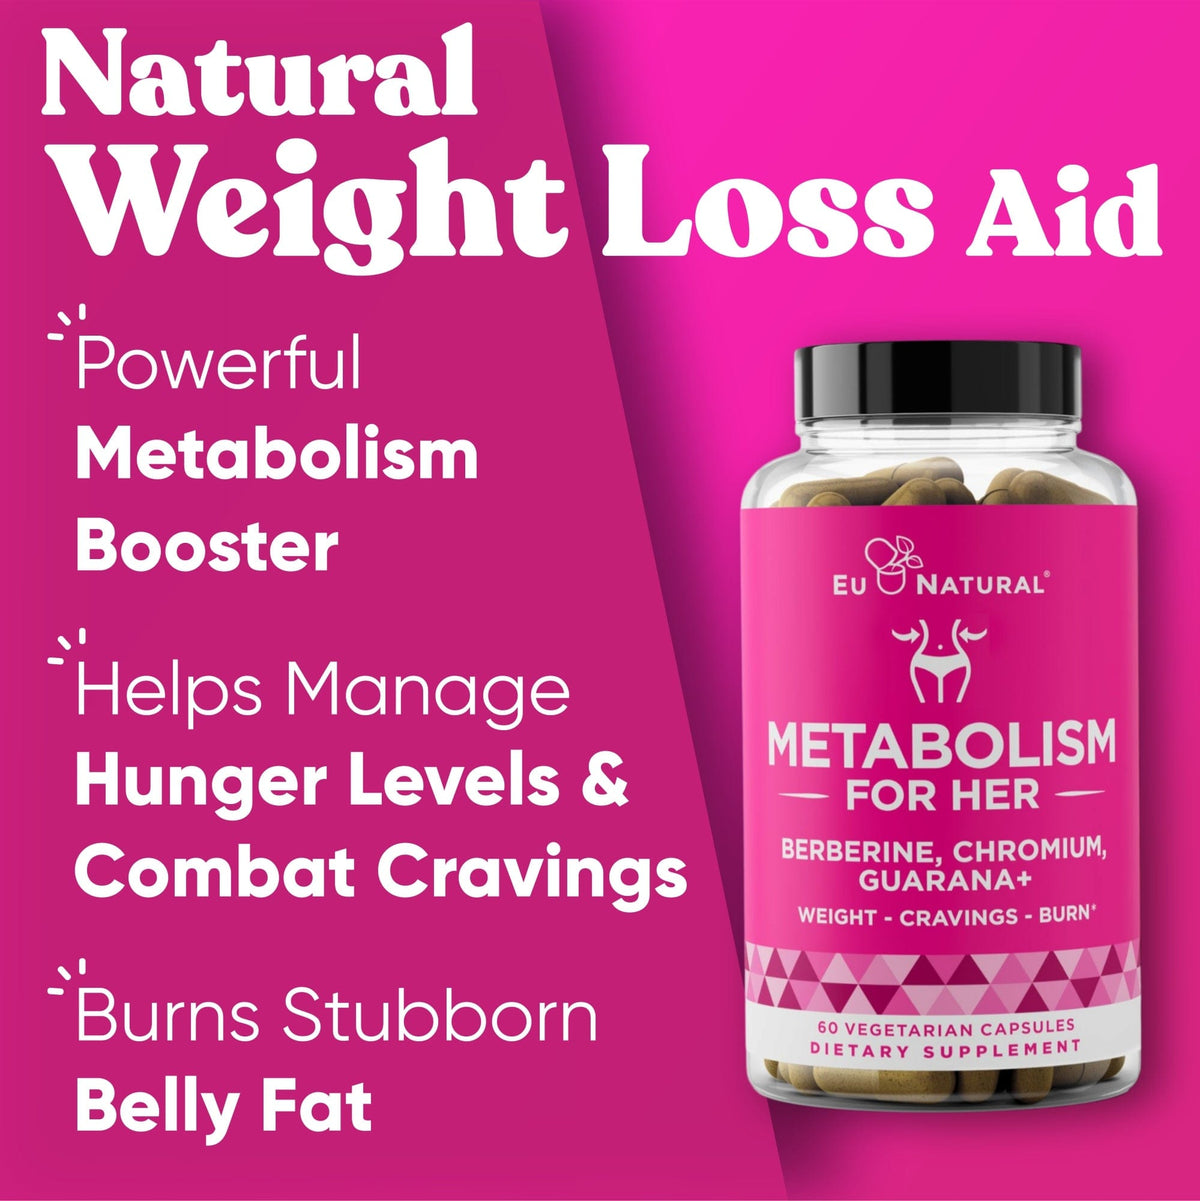 Eu Natural METABOLISM FOR HER Weight, Cravings, &amp; Fat Burn Support